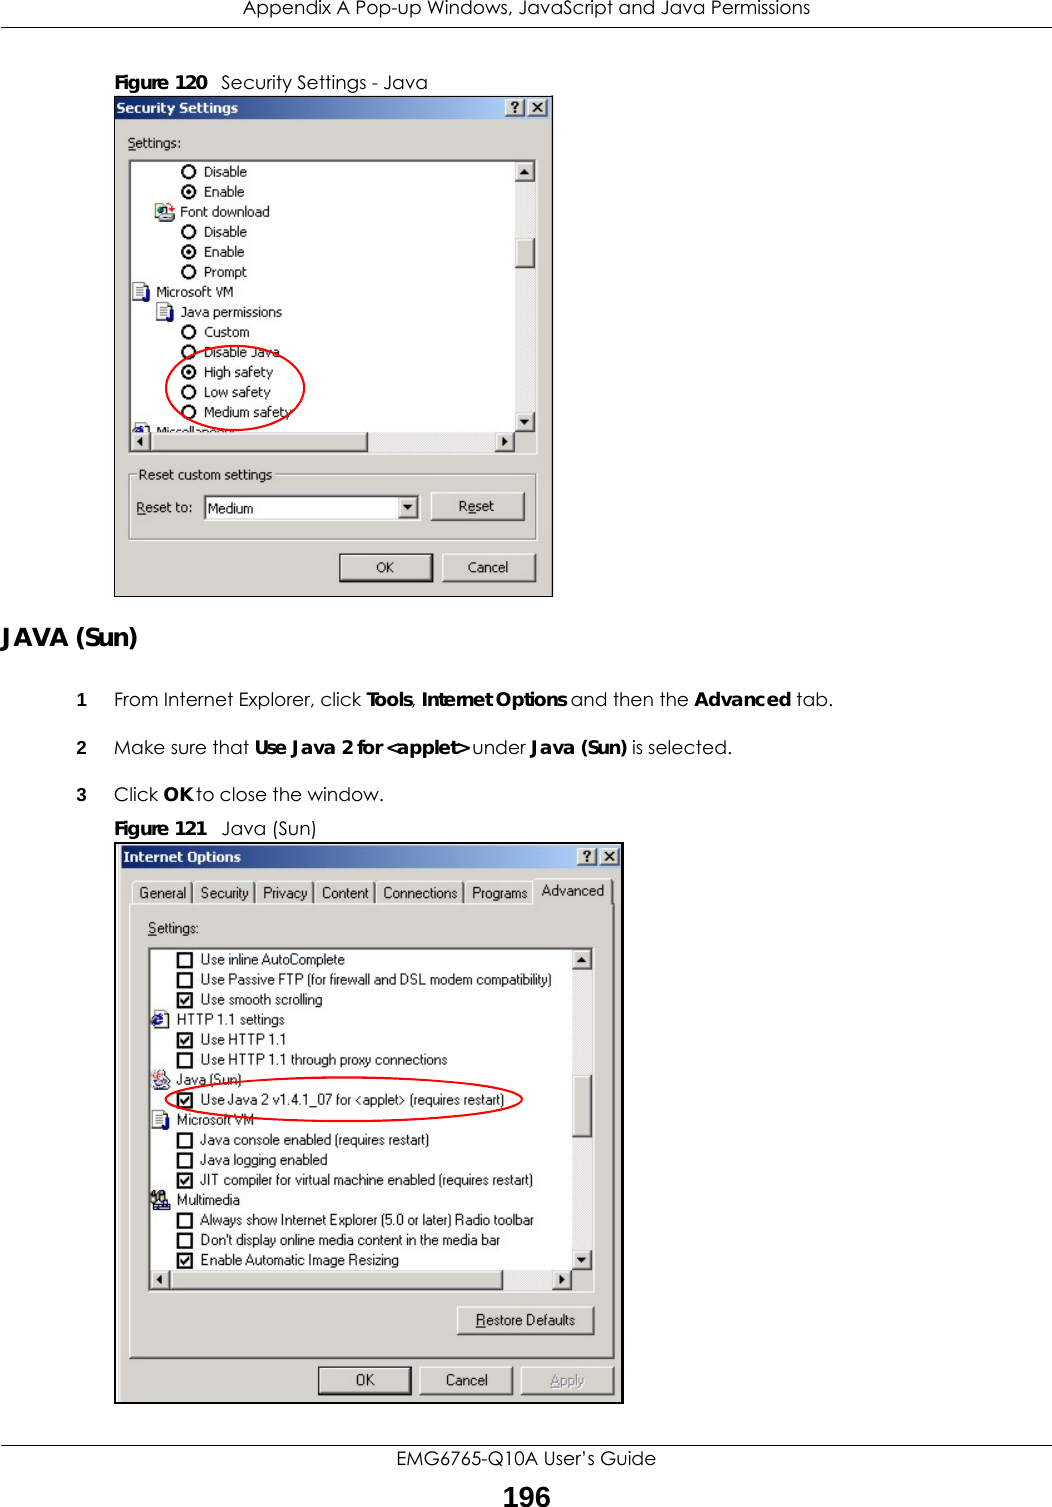 Appendix A Pop-up Windows, JavaScript and Java PermissionsEMG6765-Q10A User’s Guide196Figure 120   Security Settings - Java JAVA (Sun)1From Internet Explorer, click Tools, Internet Options and then the Advanced tab. 2Make sure that Use Java 2 for &lt;applet&gt; under Java (Sun) is selected.3Click OK to close the window.Figure 121   Java (Sun)